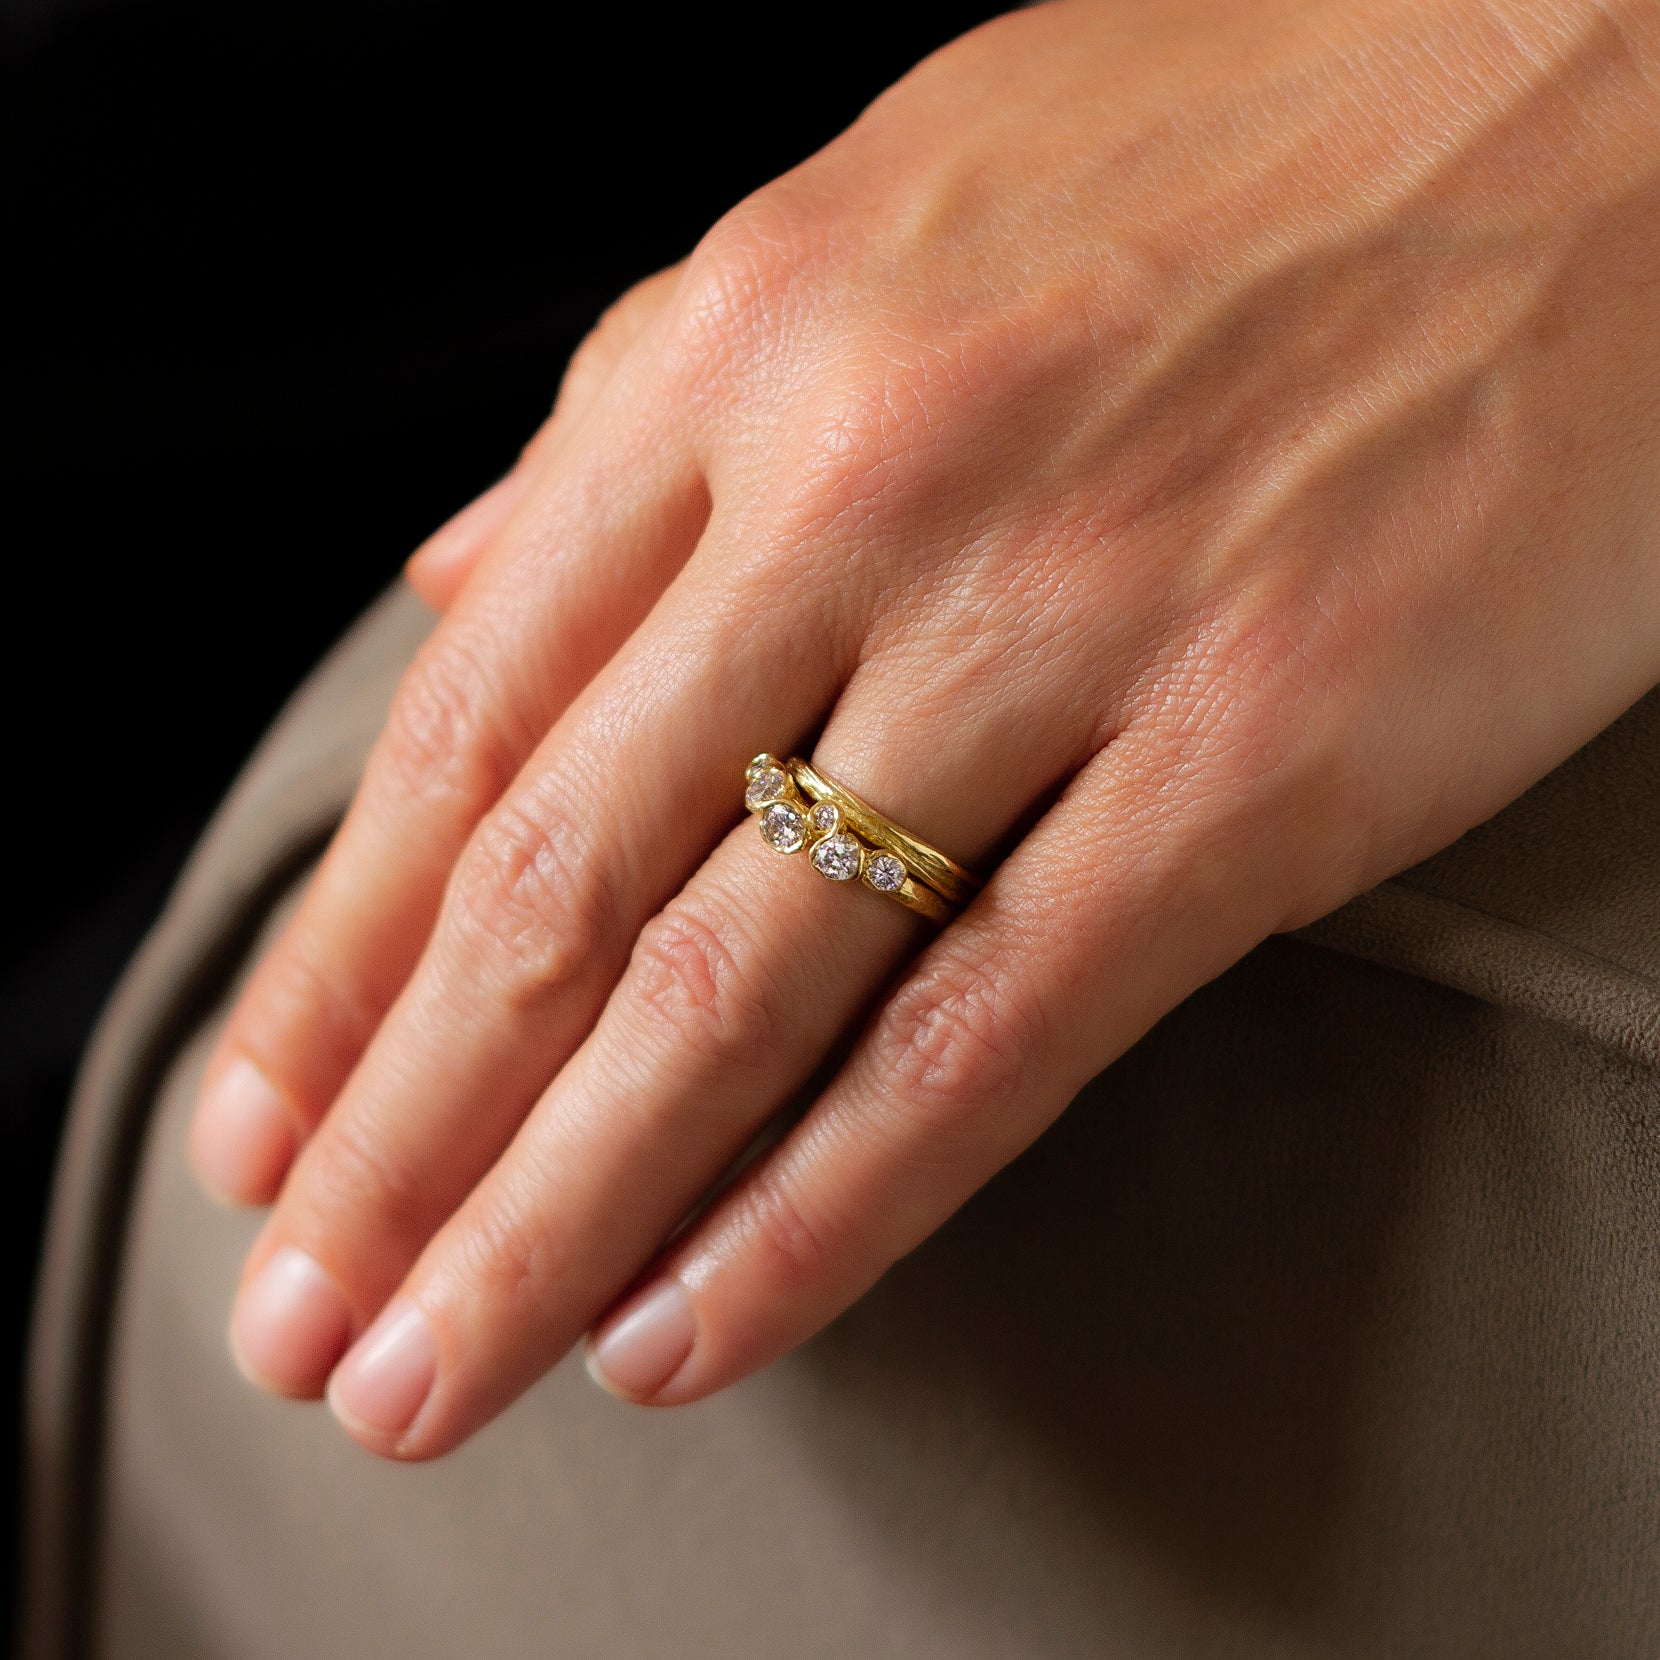 An unusual, alternative engagement ring by Emily Nixon. This ring has been set with 6 diamonds, in an organic design. Photographed on a models hand, sitting next to a gold ripple band.